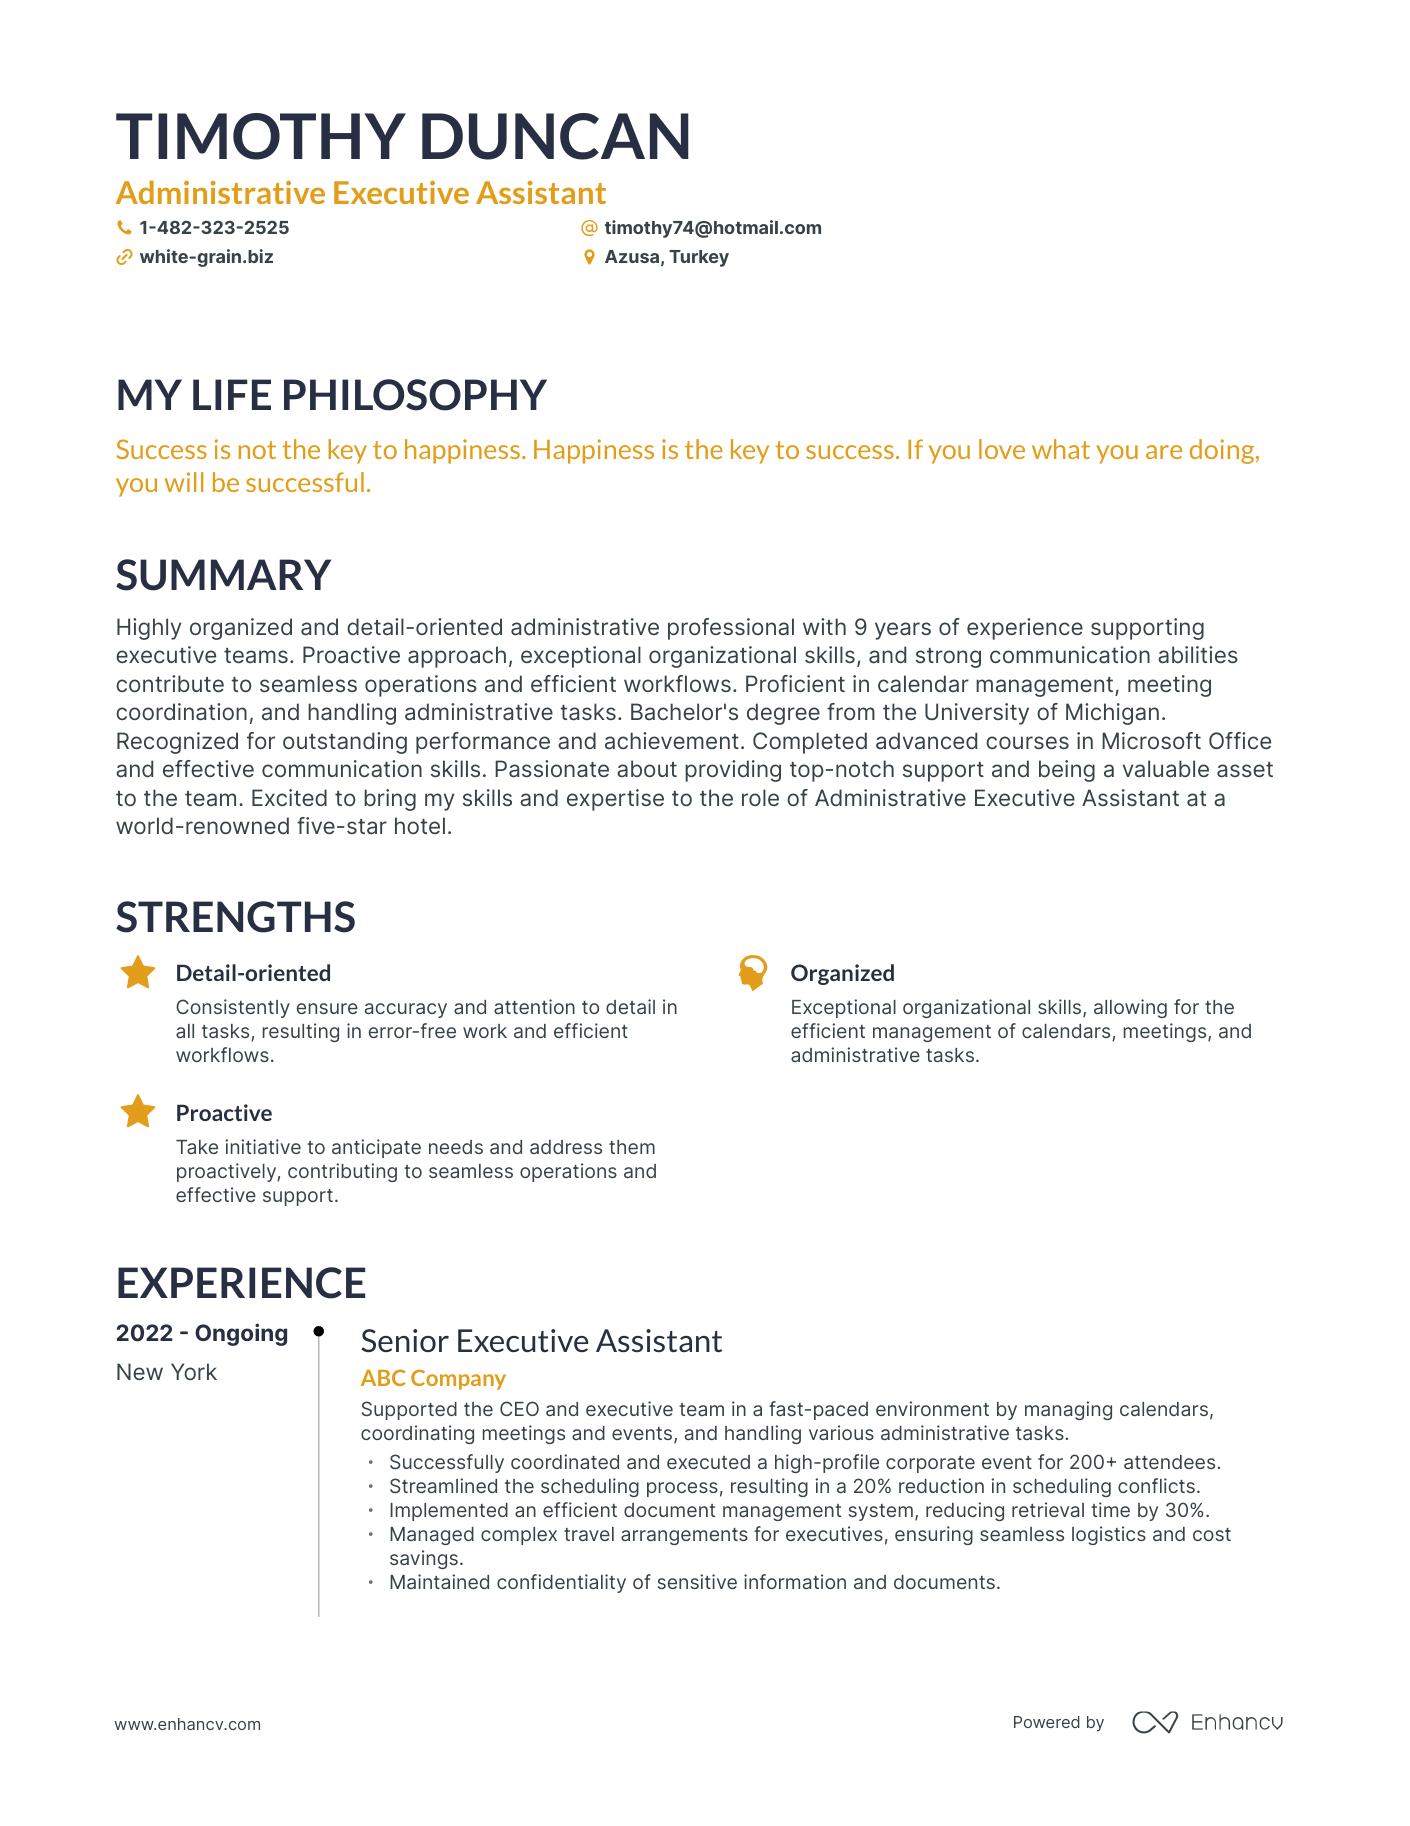 Creative Administrative Executive Assistant Resume Example